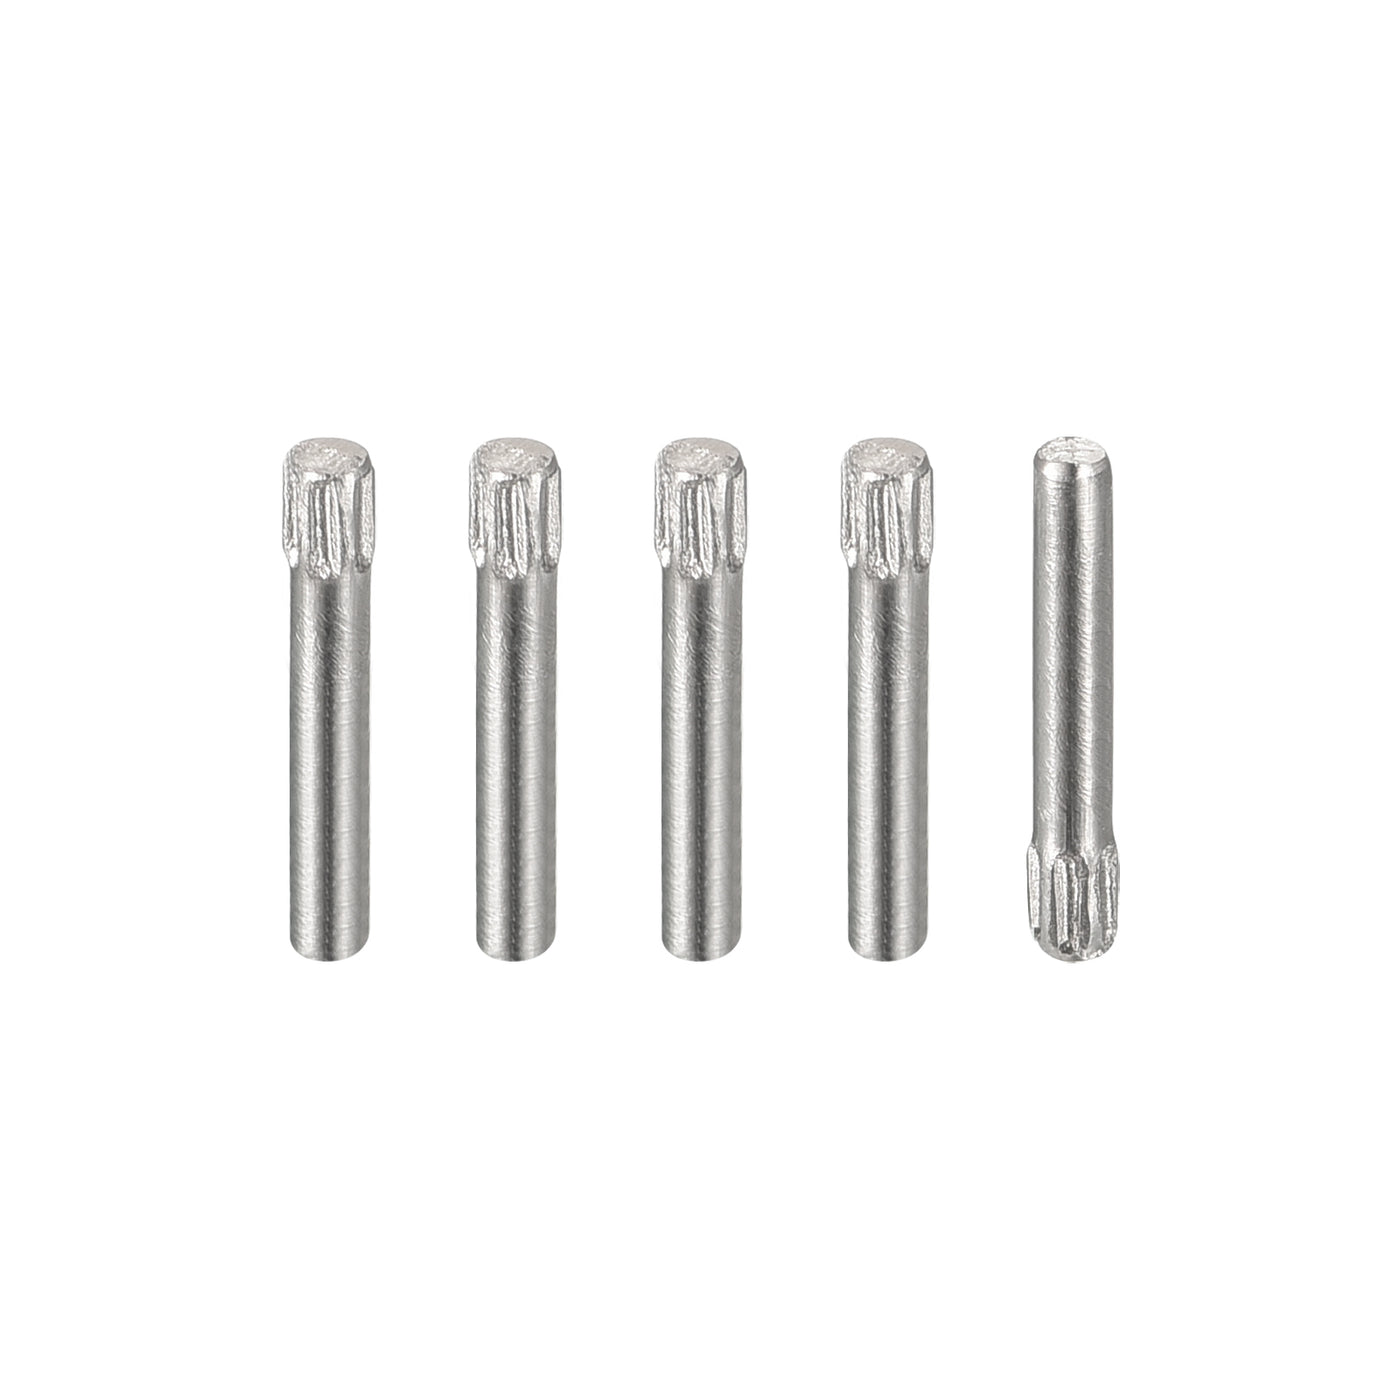 uxcell Uxcell 1.5x10mm 304 Stainless Steel Dowel Pins, 5Pcs Knurled Head Flat End Dowel Pin